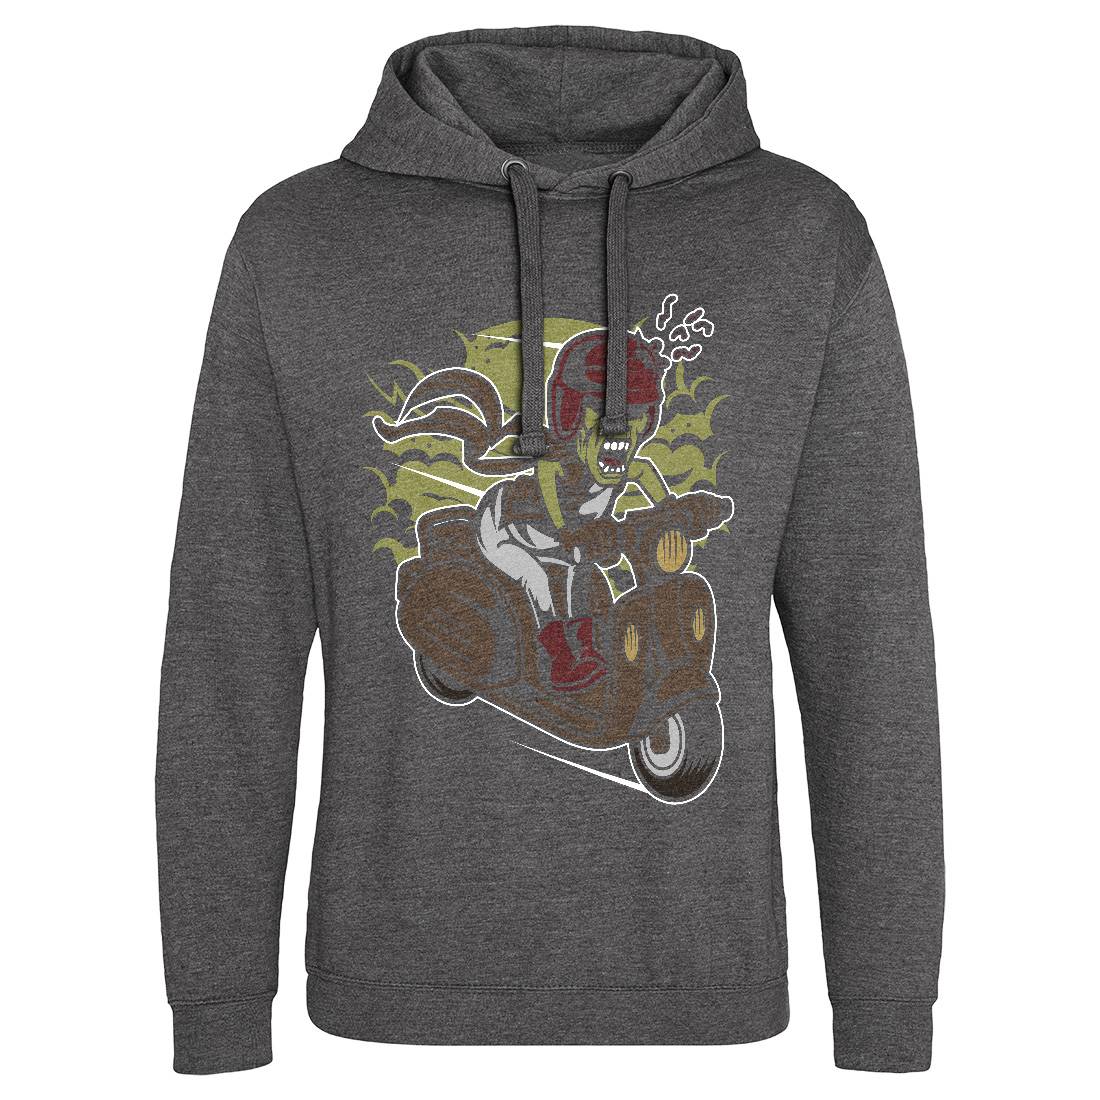 Zombie Scooter Mens Hoodie Without Pocket Motorcycles C476